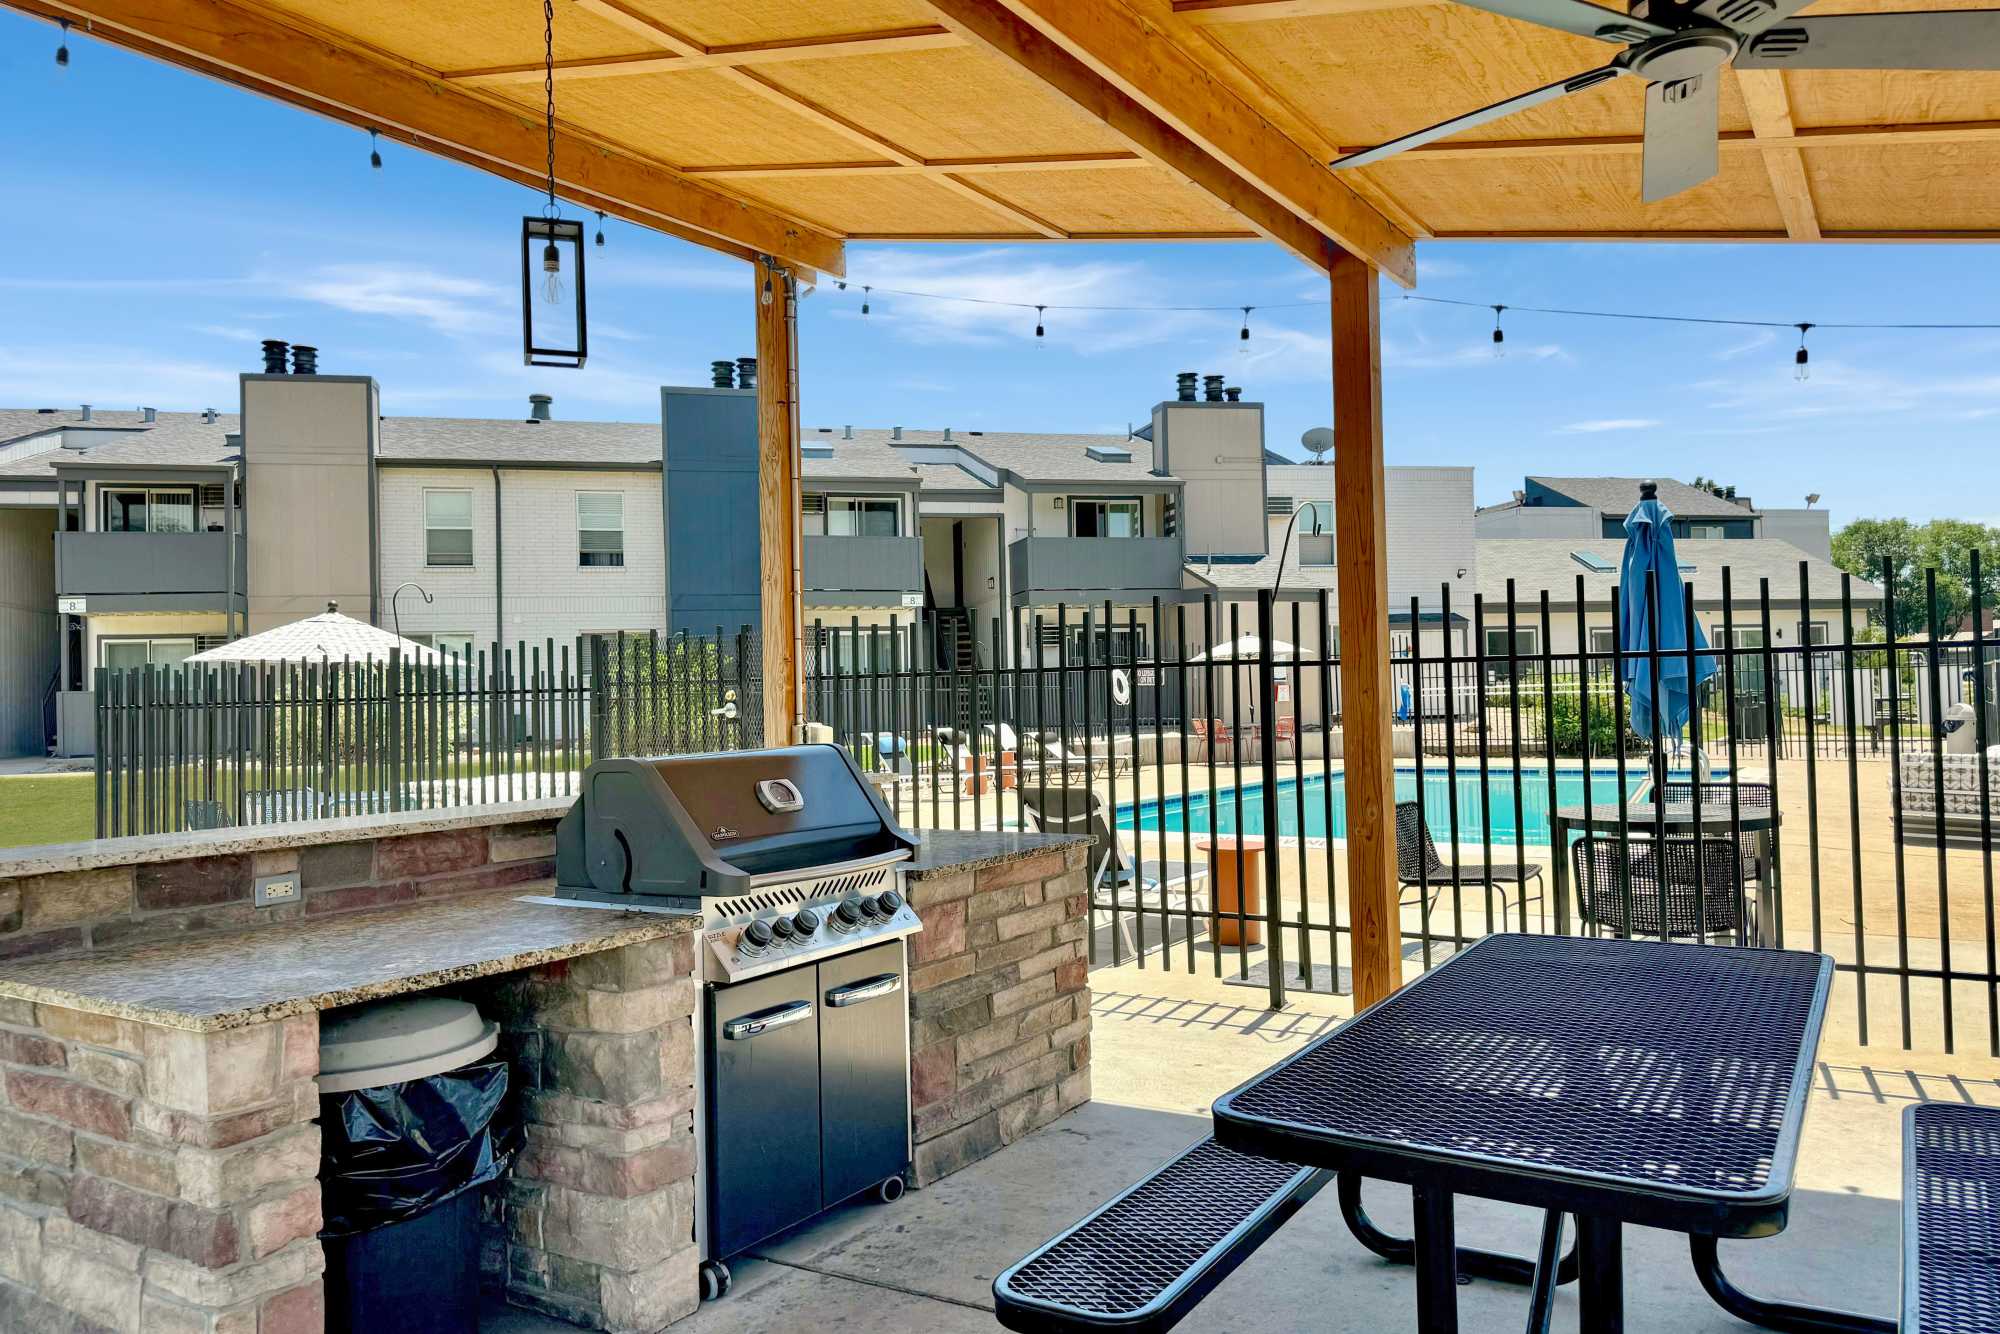 Grilling area surrounded by lush green grass at Ascent at Lowry in Denver, Colorado